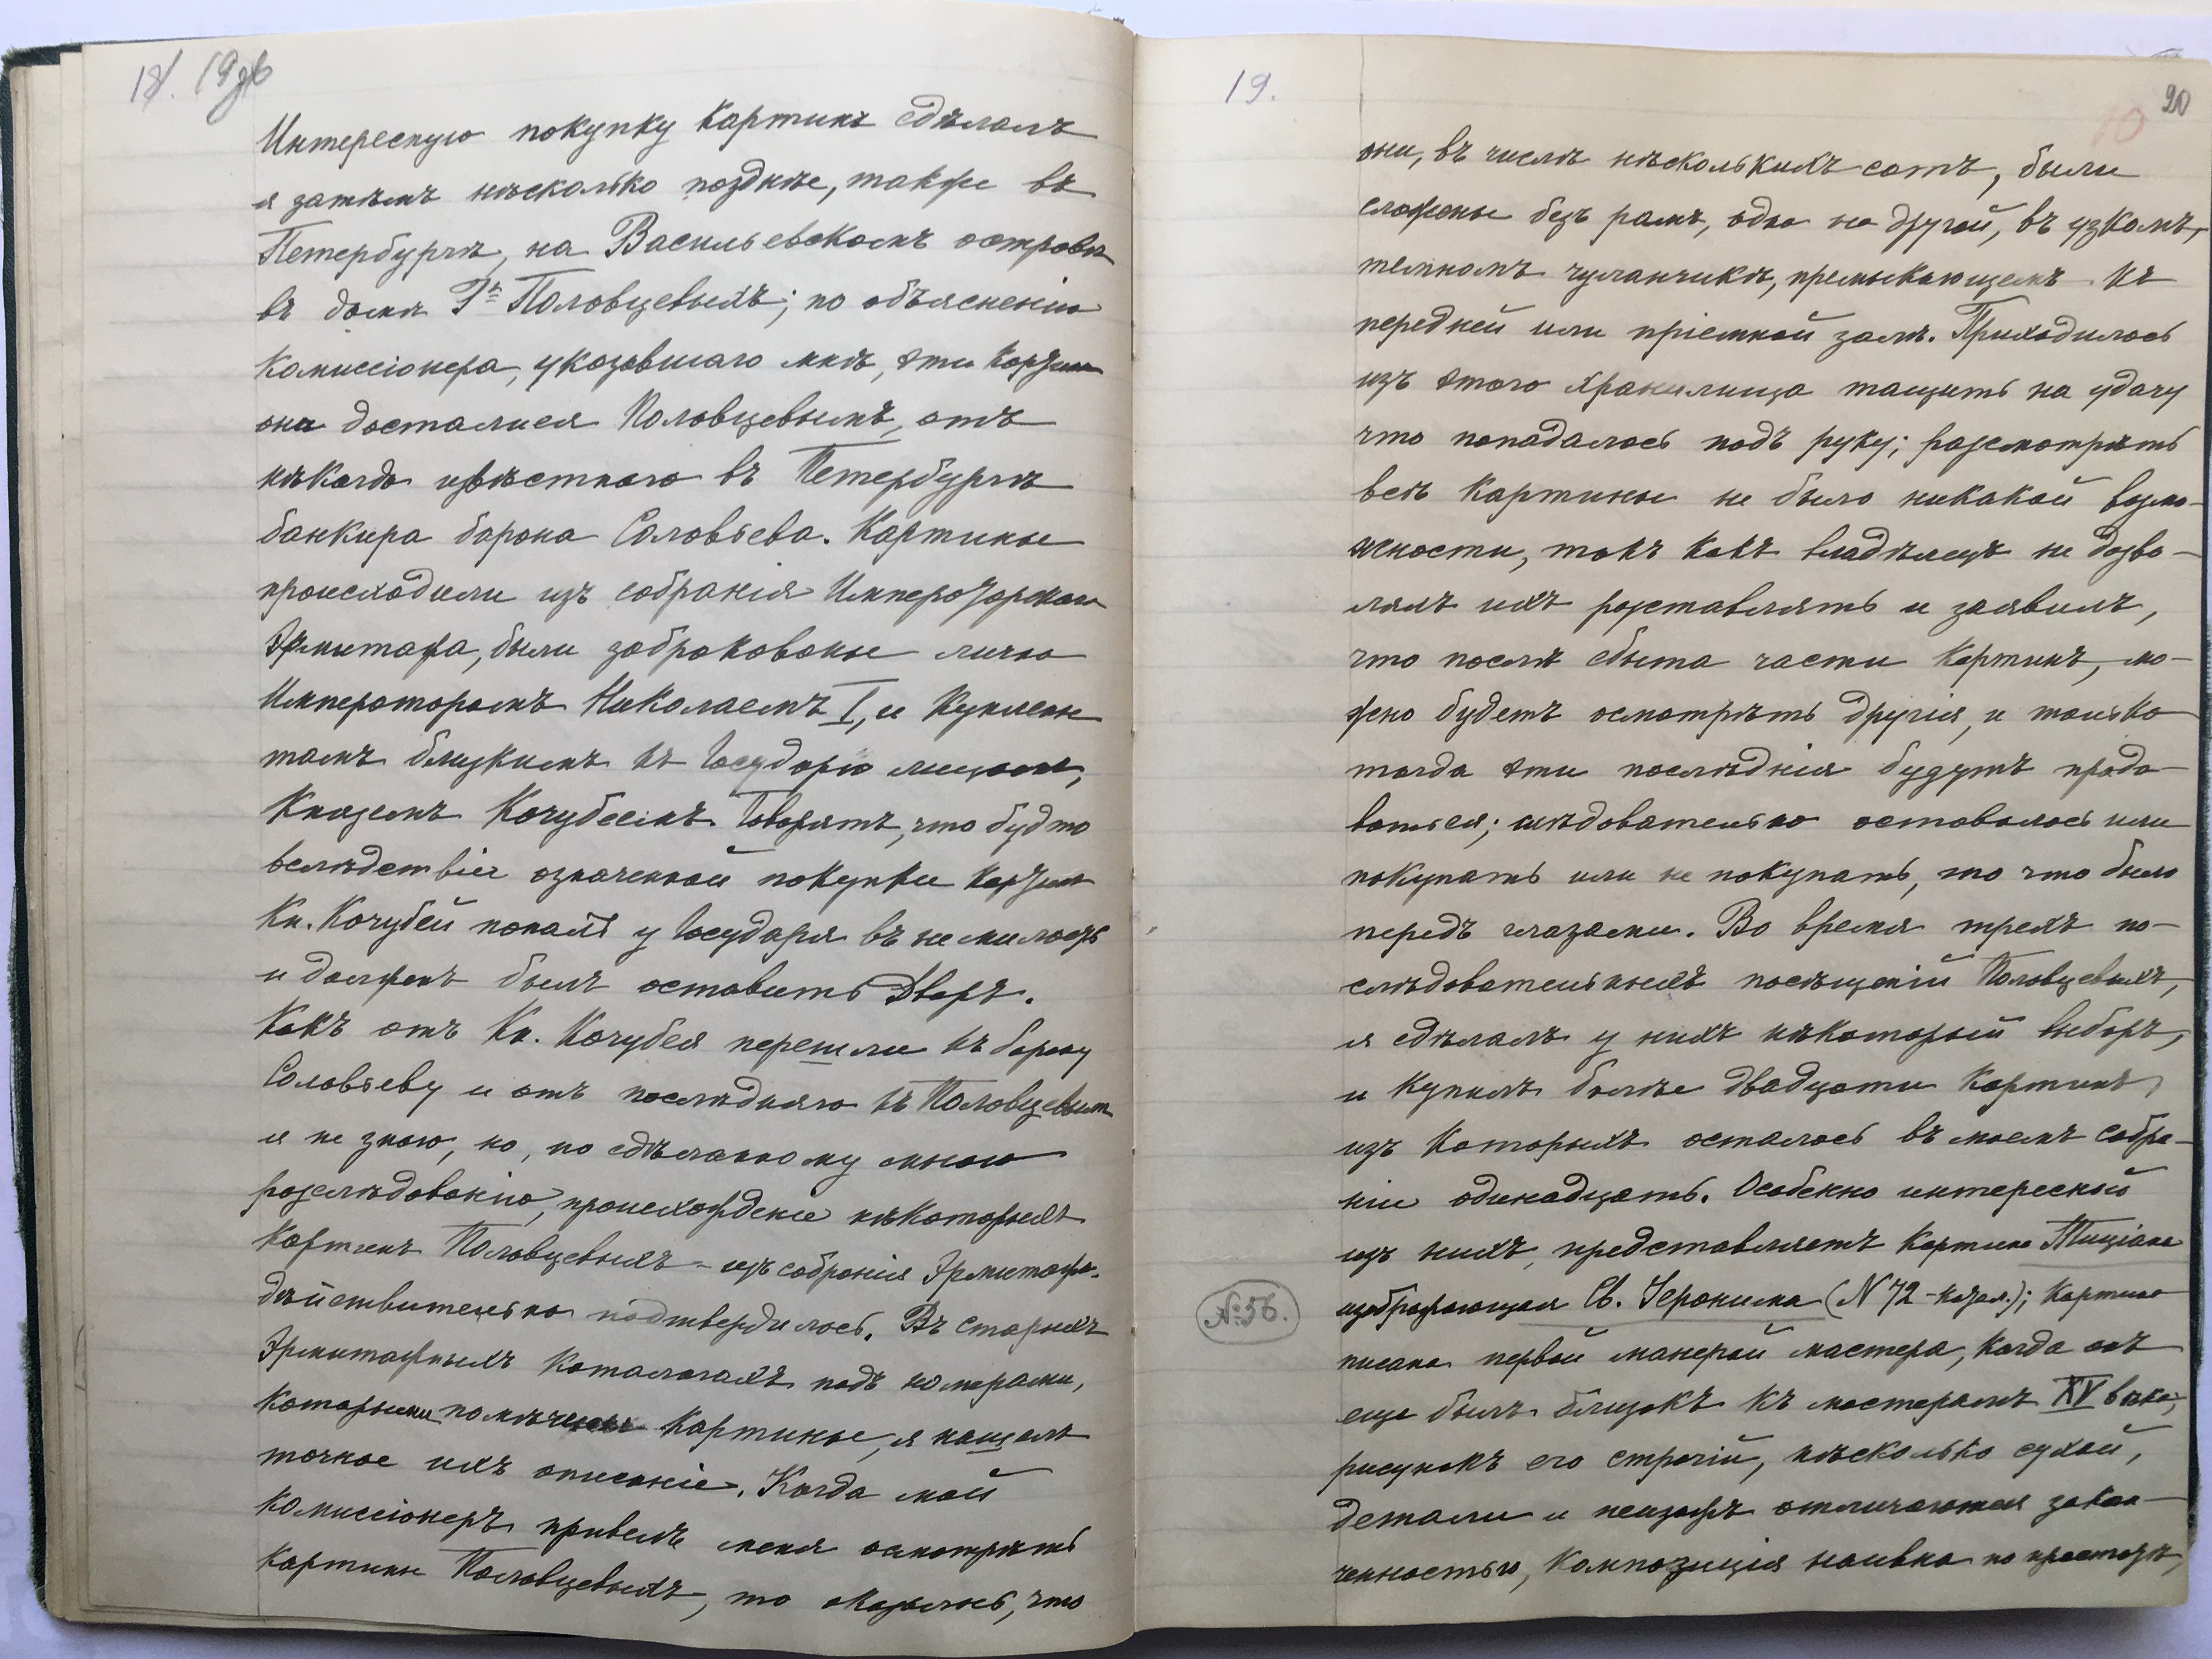 Memories of Bohdan Khanenko about the history of the collection. Page or the manuscript by Varvara Khanenko. From the museum’s archive.